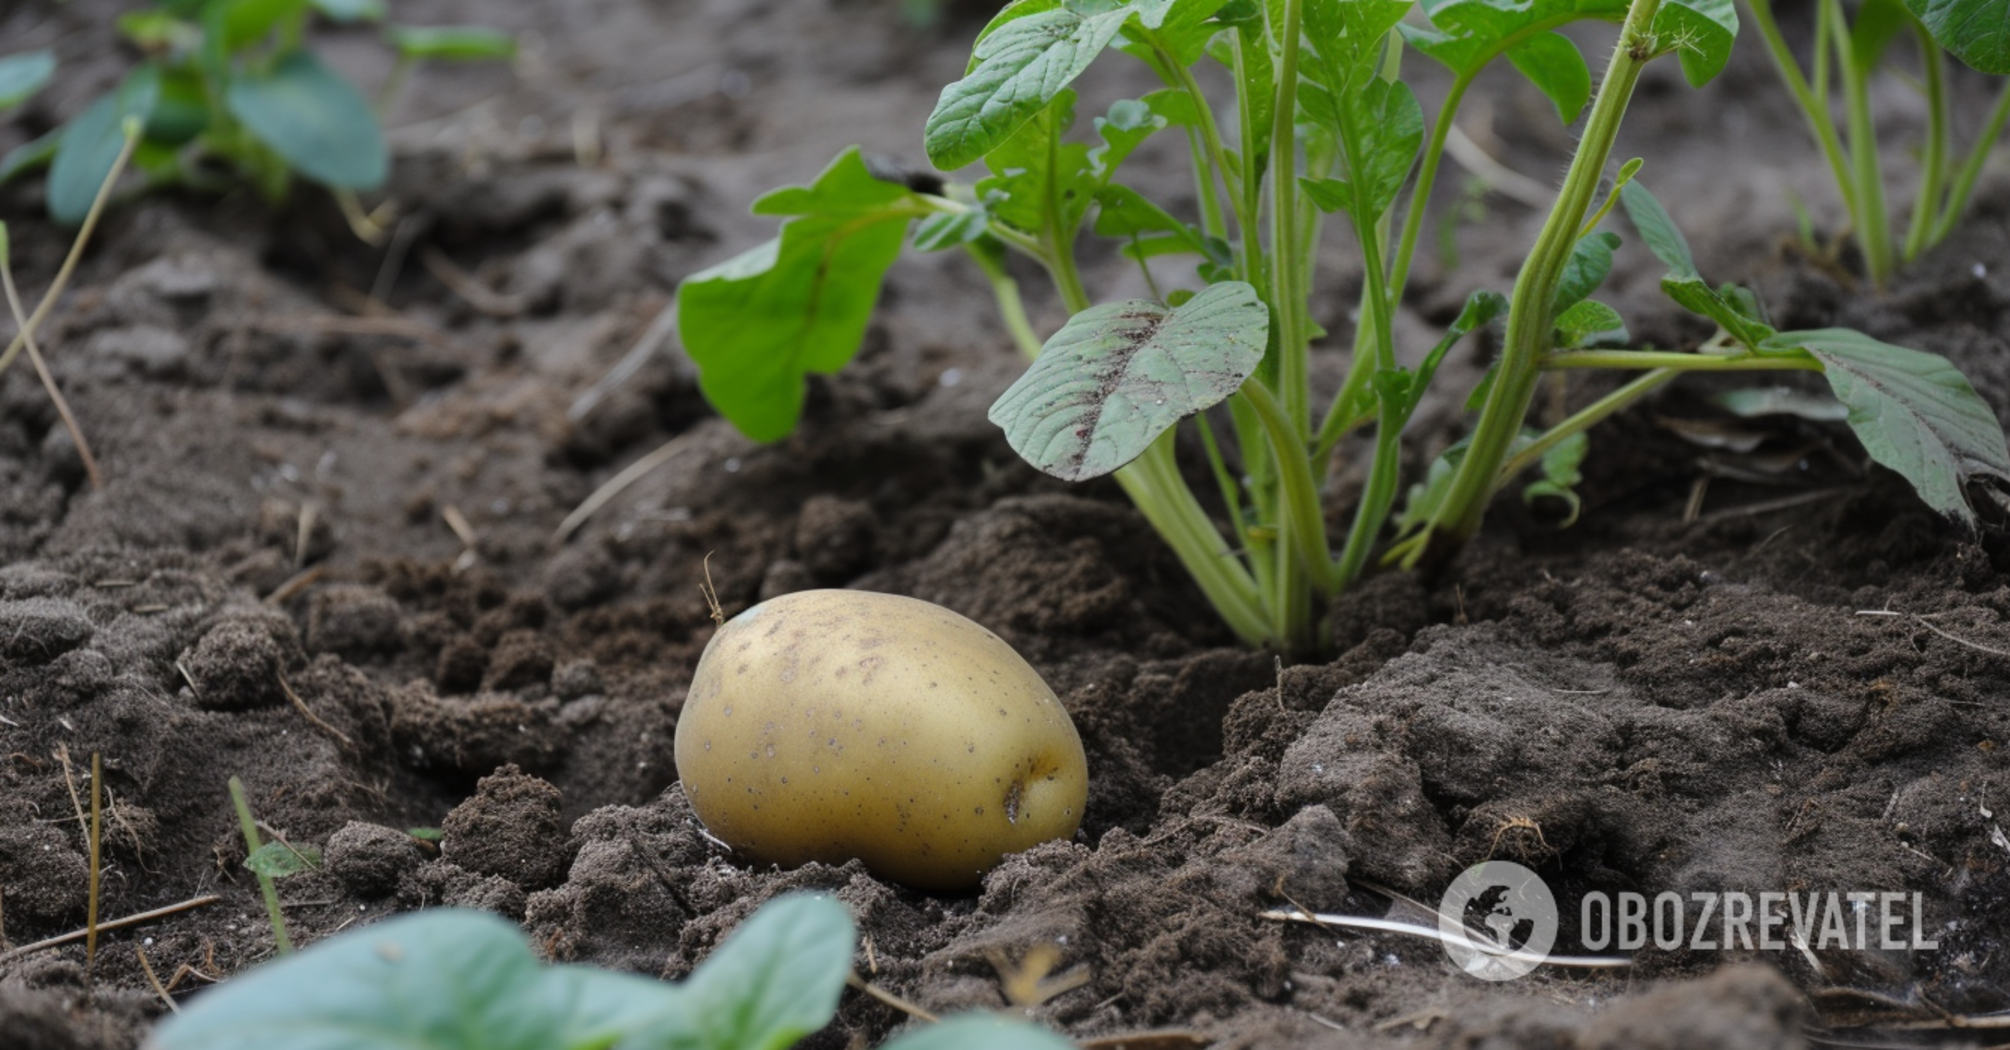 When to dig potatoes and how to store them properly to keep them through the winter